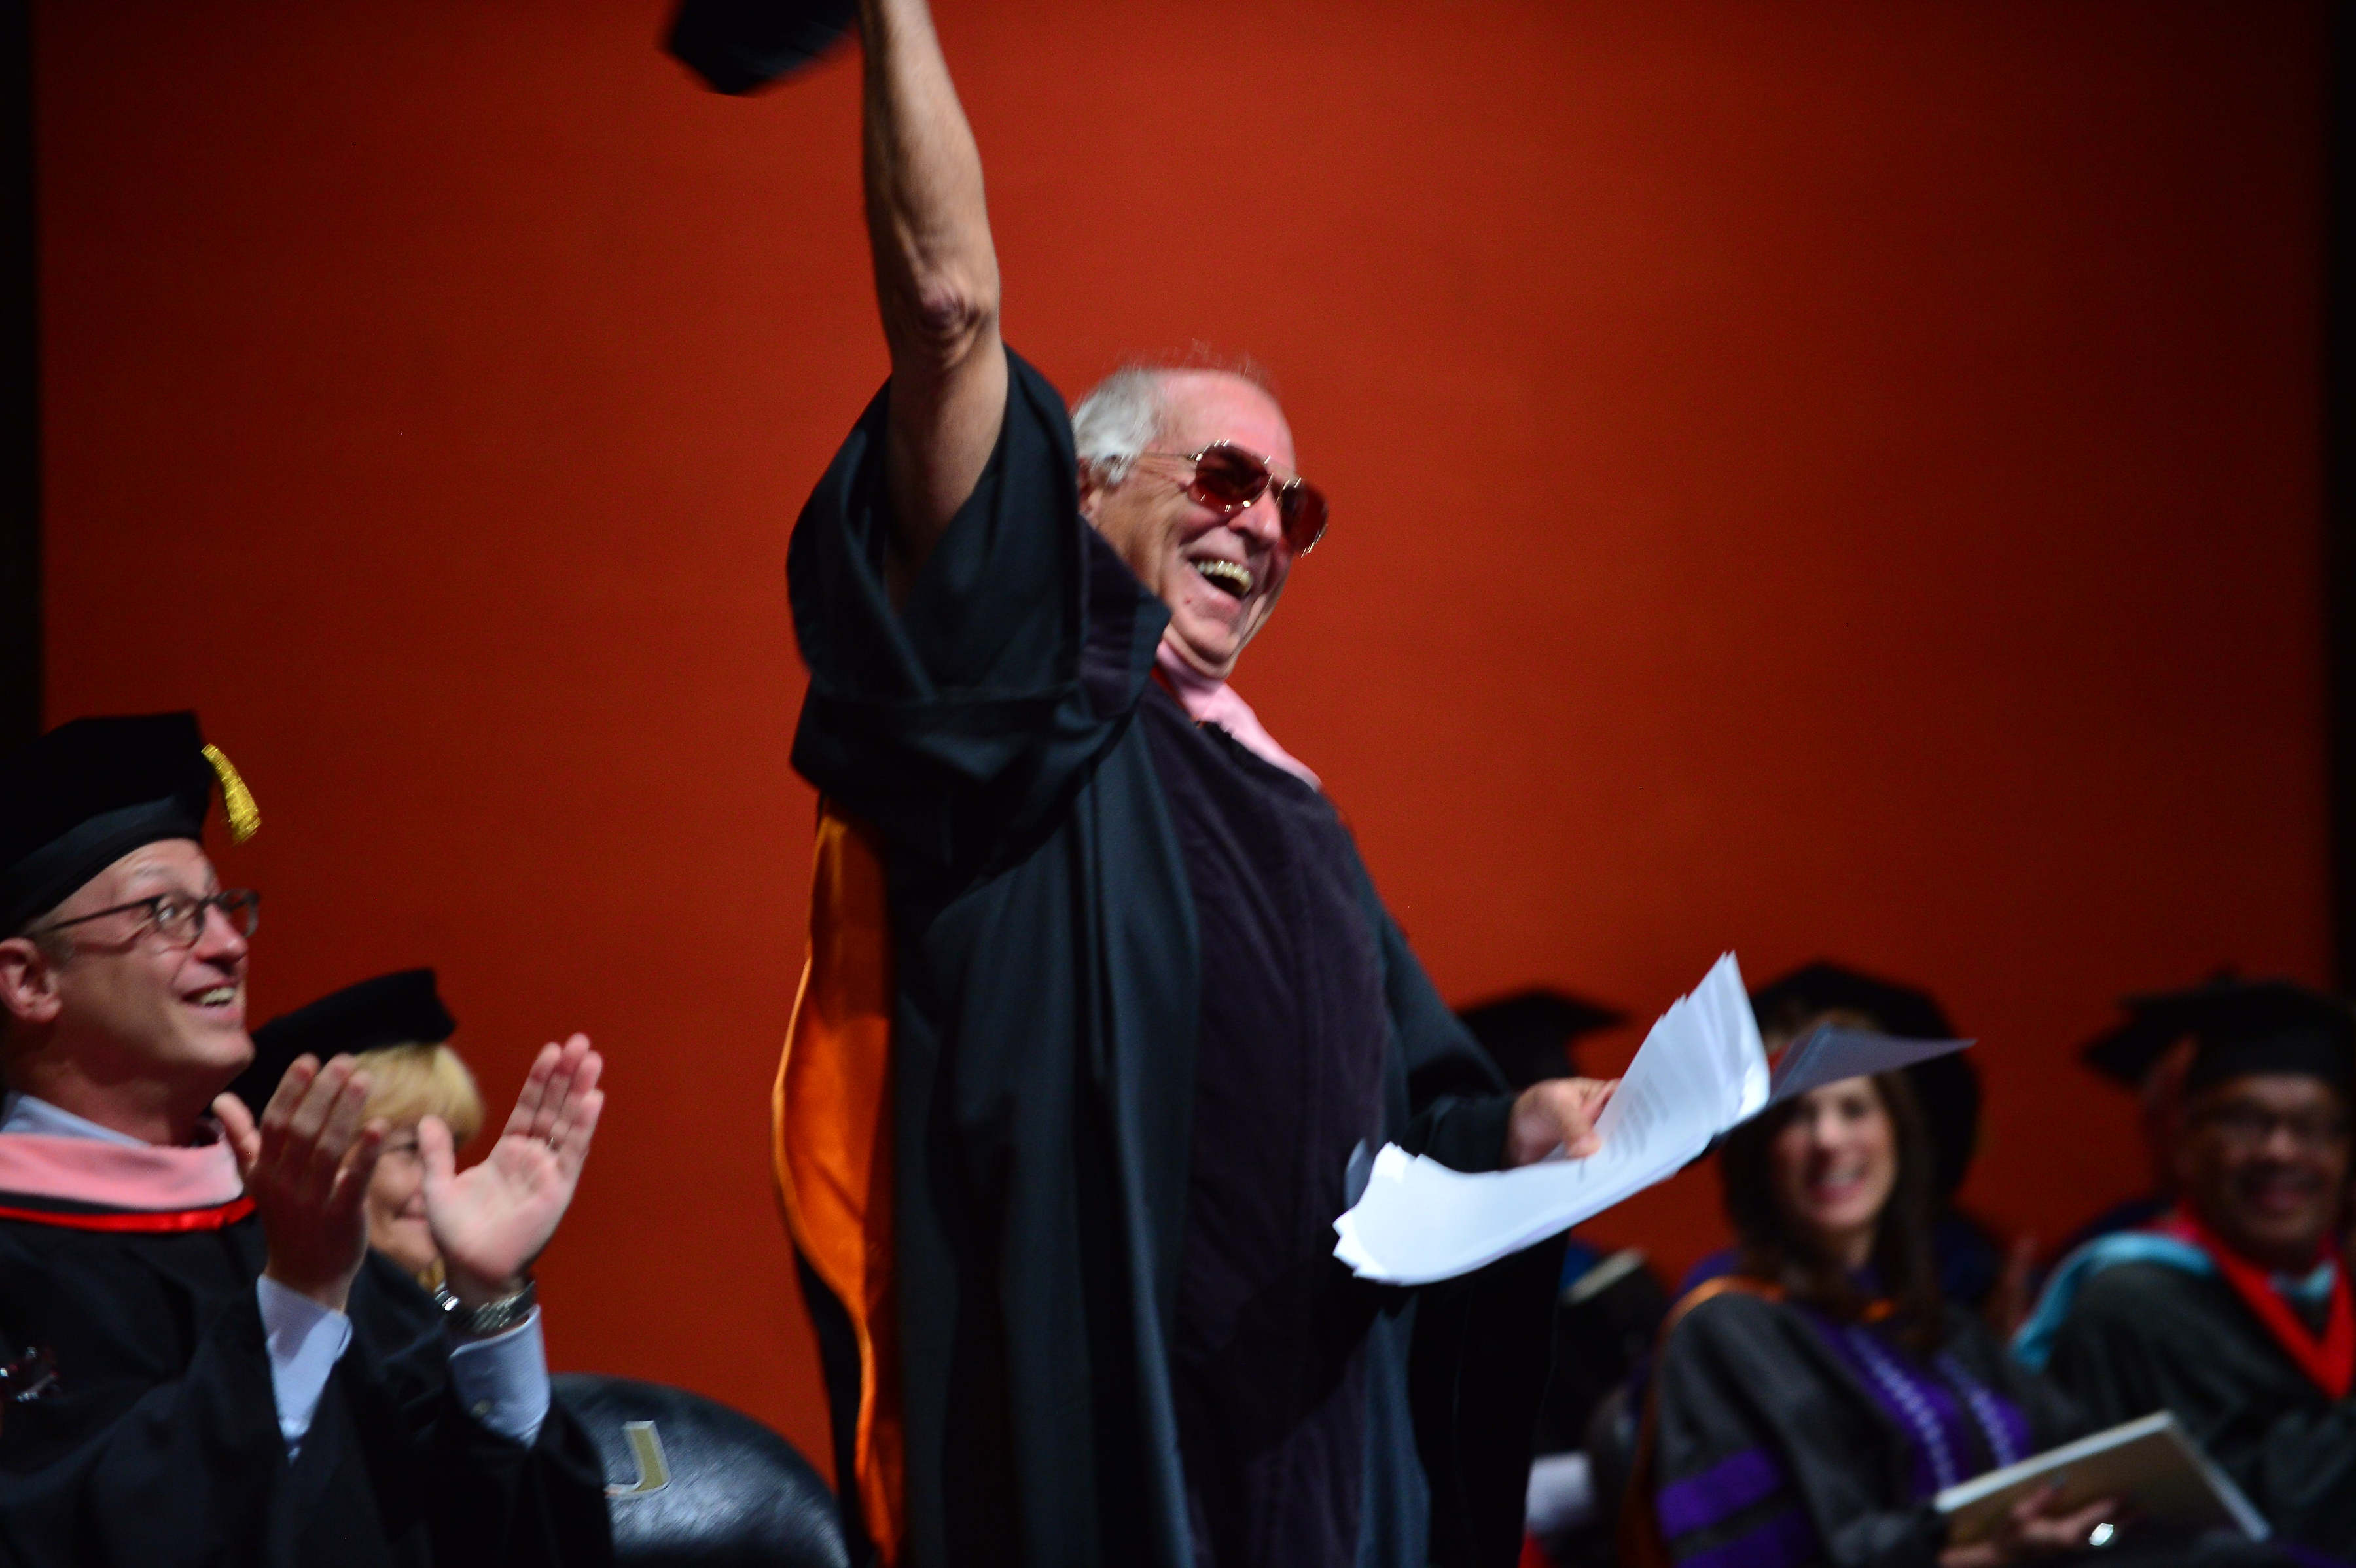 jimmy on stage during a graduation ceremony